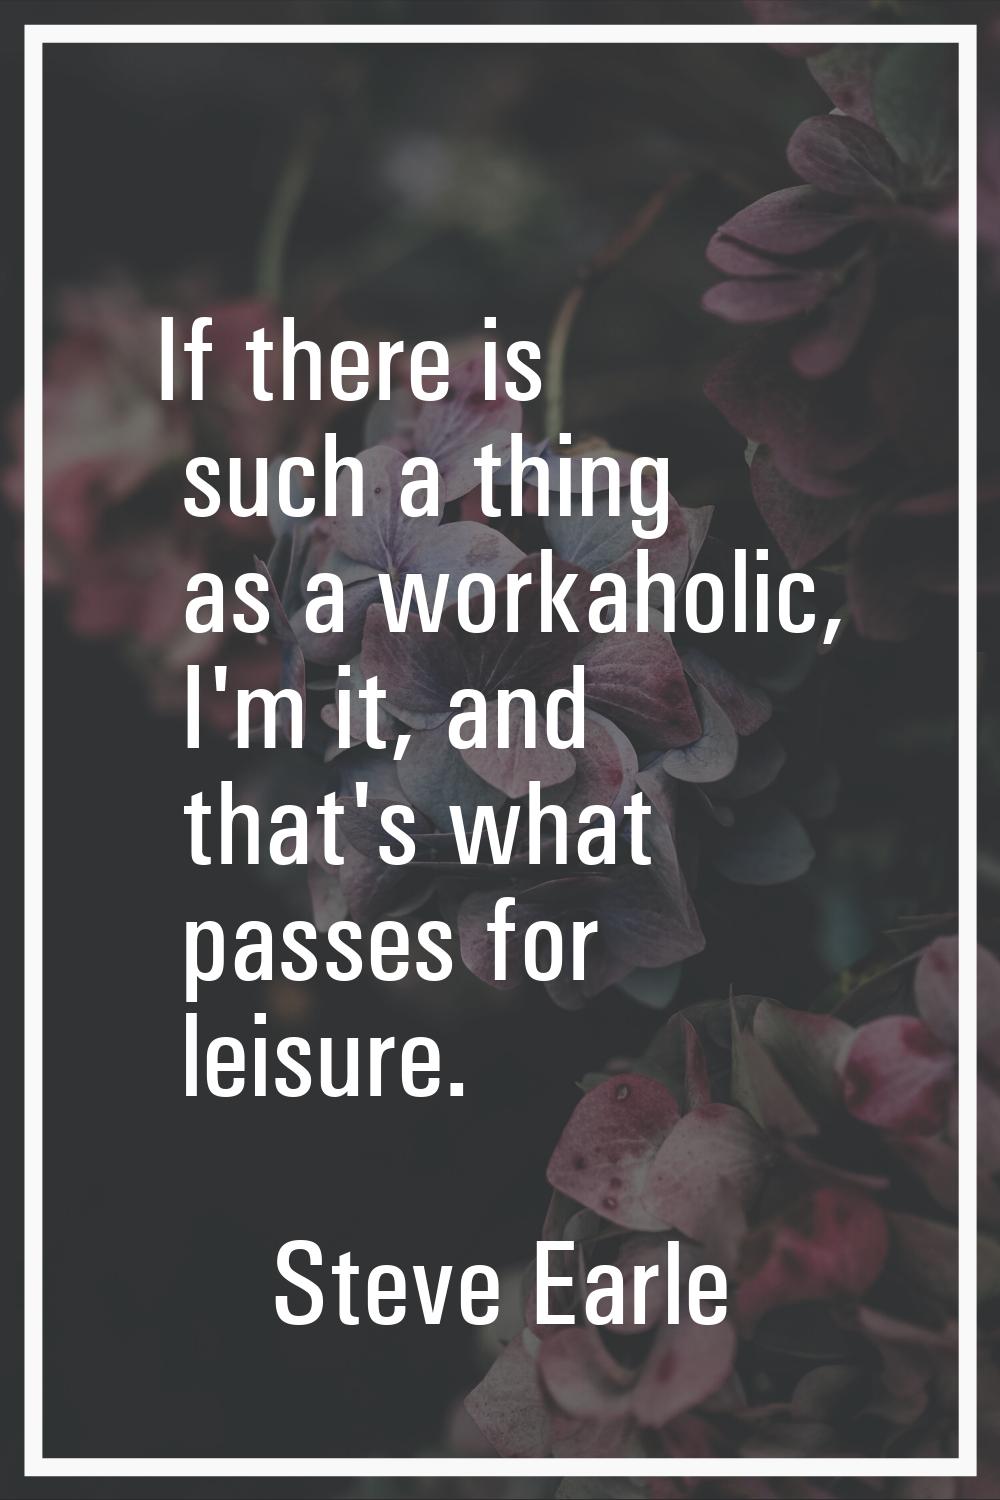 If there is such a thing as a workaholic, I'm it, and that's what passes for leisure.